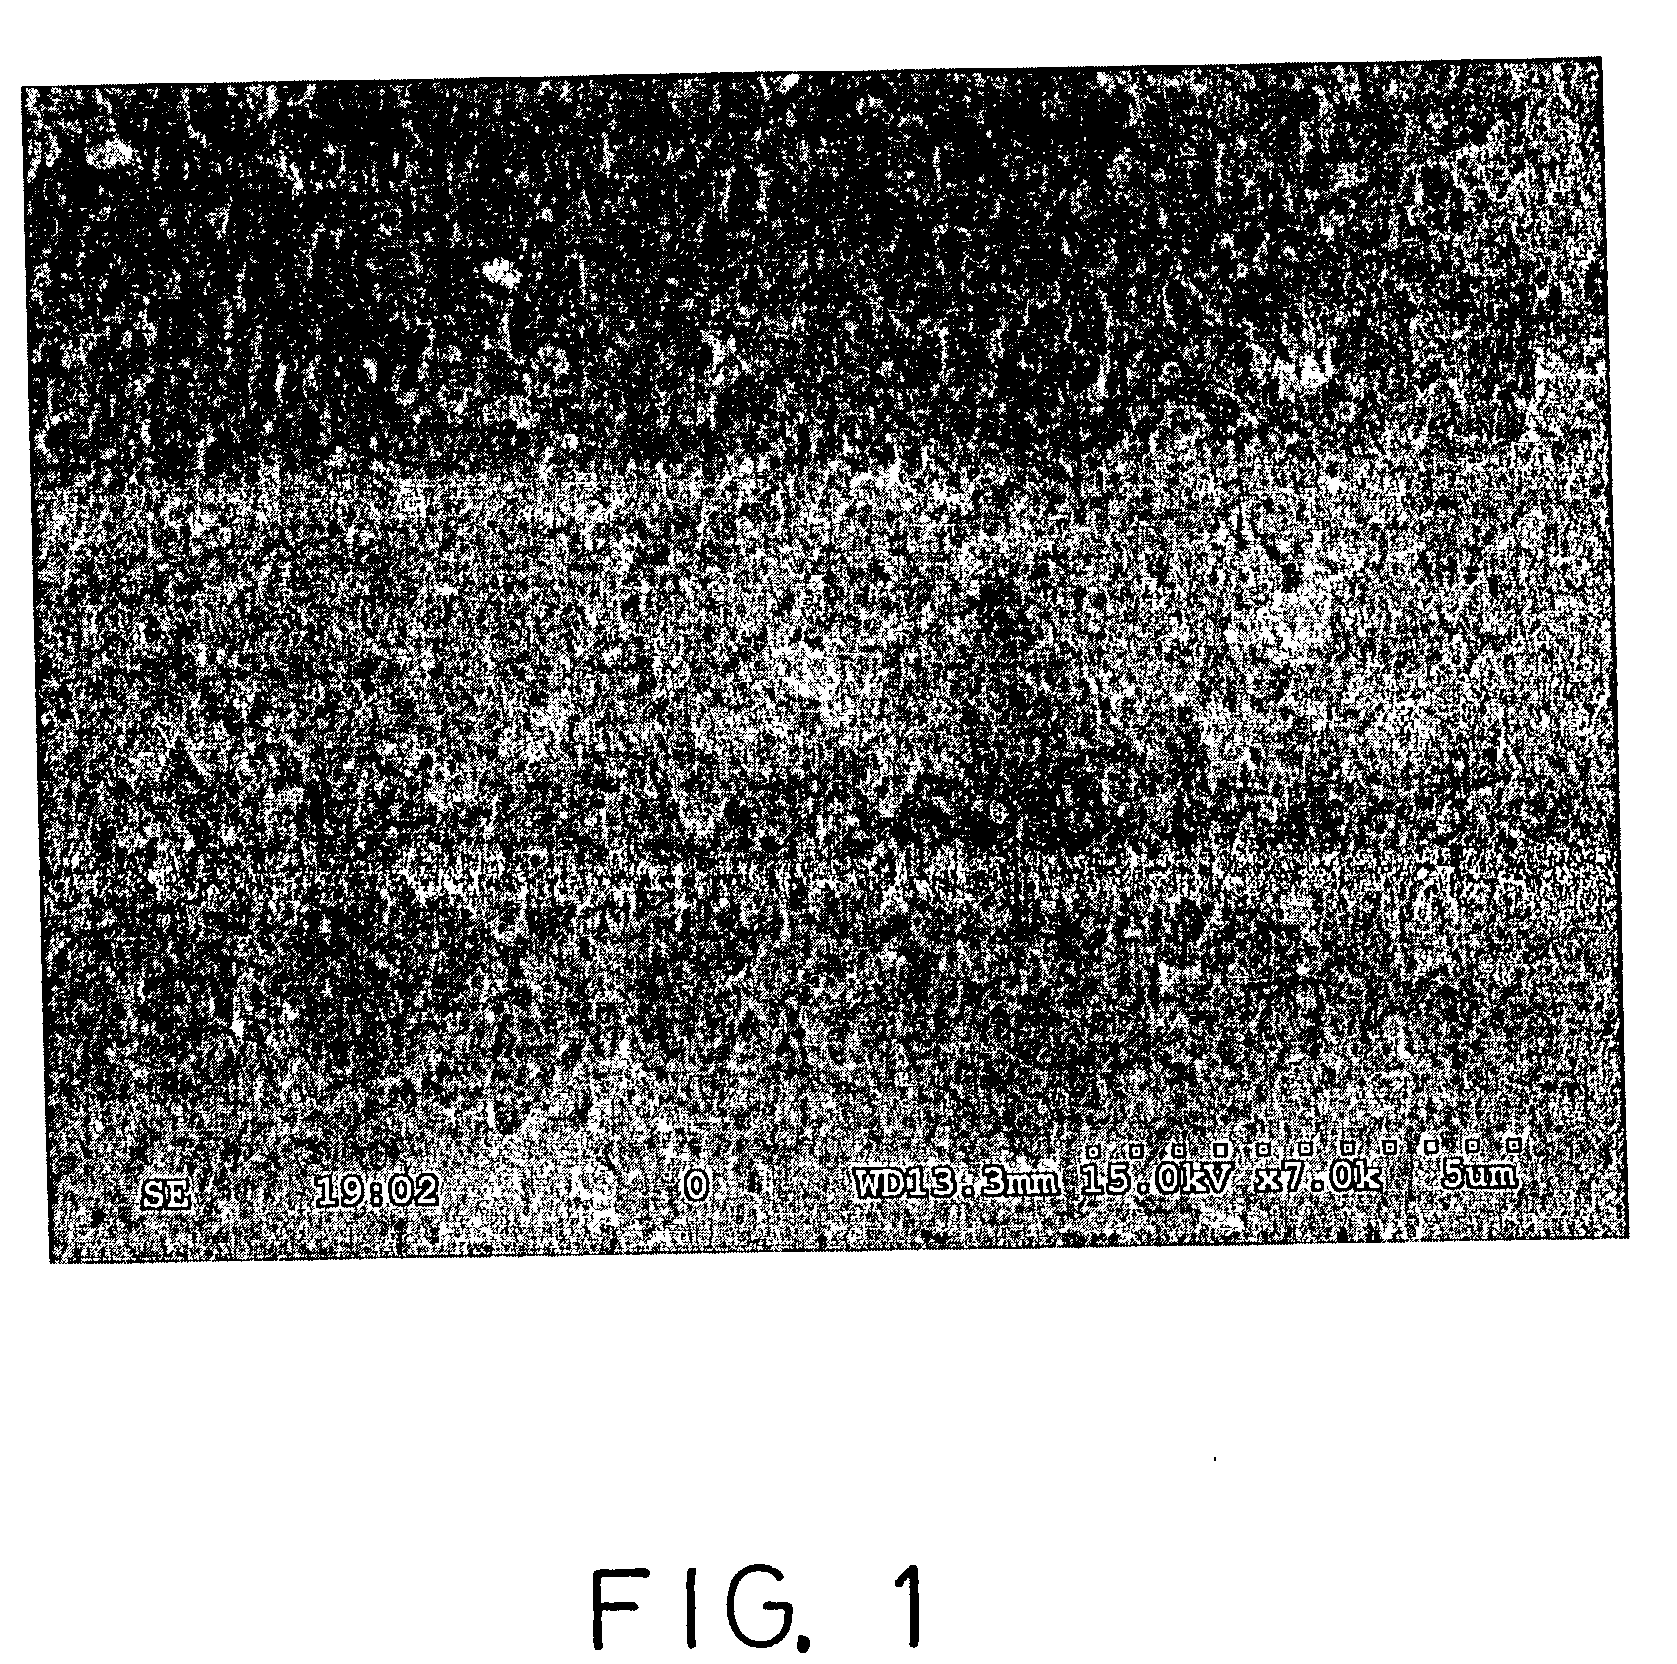 Method for preparing solid-state polymer zinc-air battery